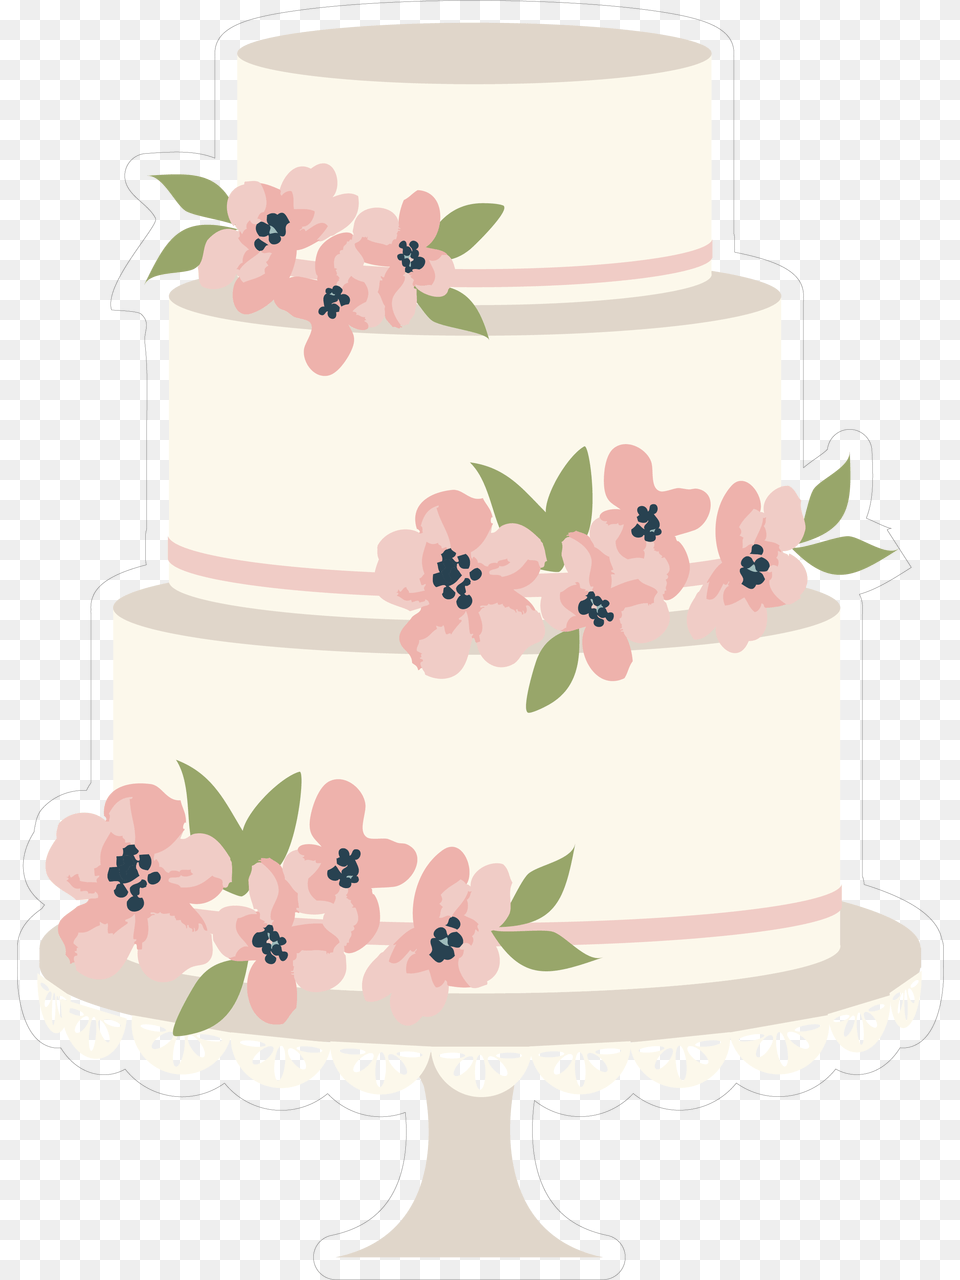 Wedding Cake With Flowers Print Amp Cut File Wedding Cake, Dessert, Food, Wedding Cake Png